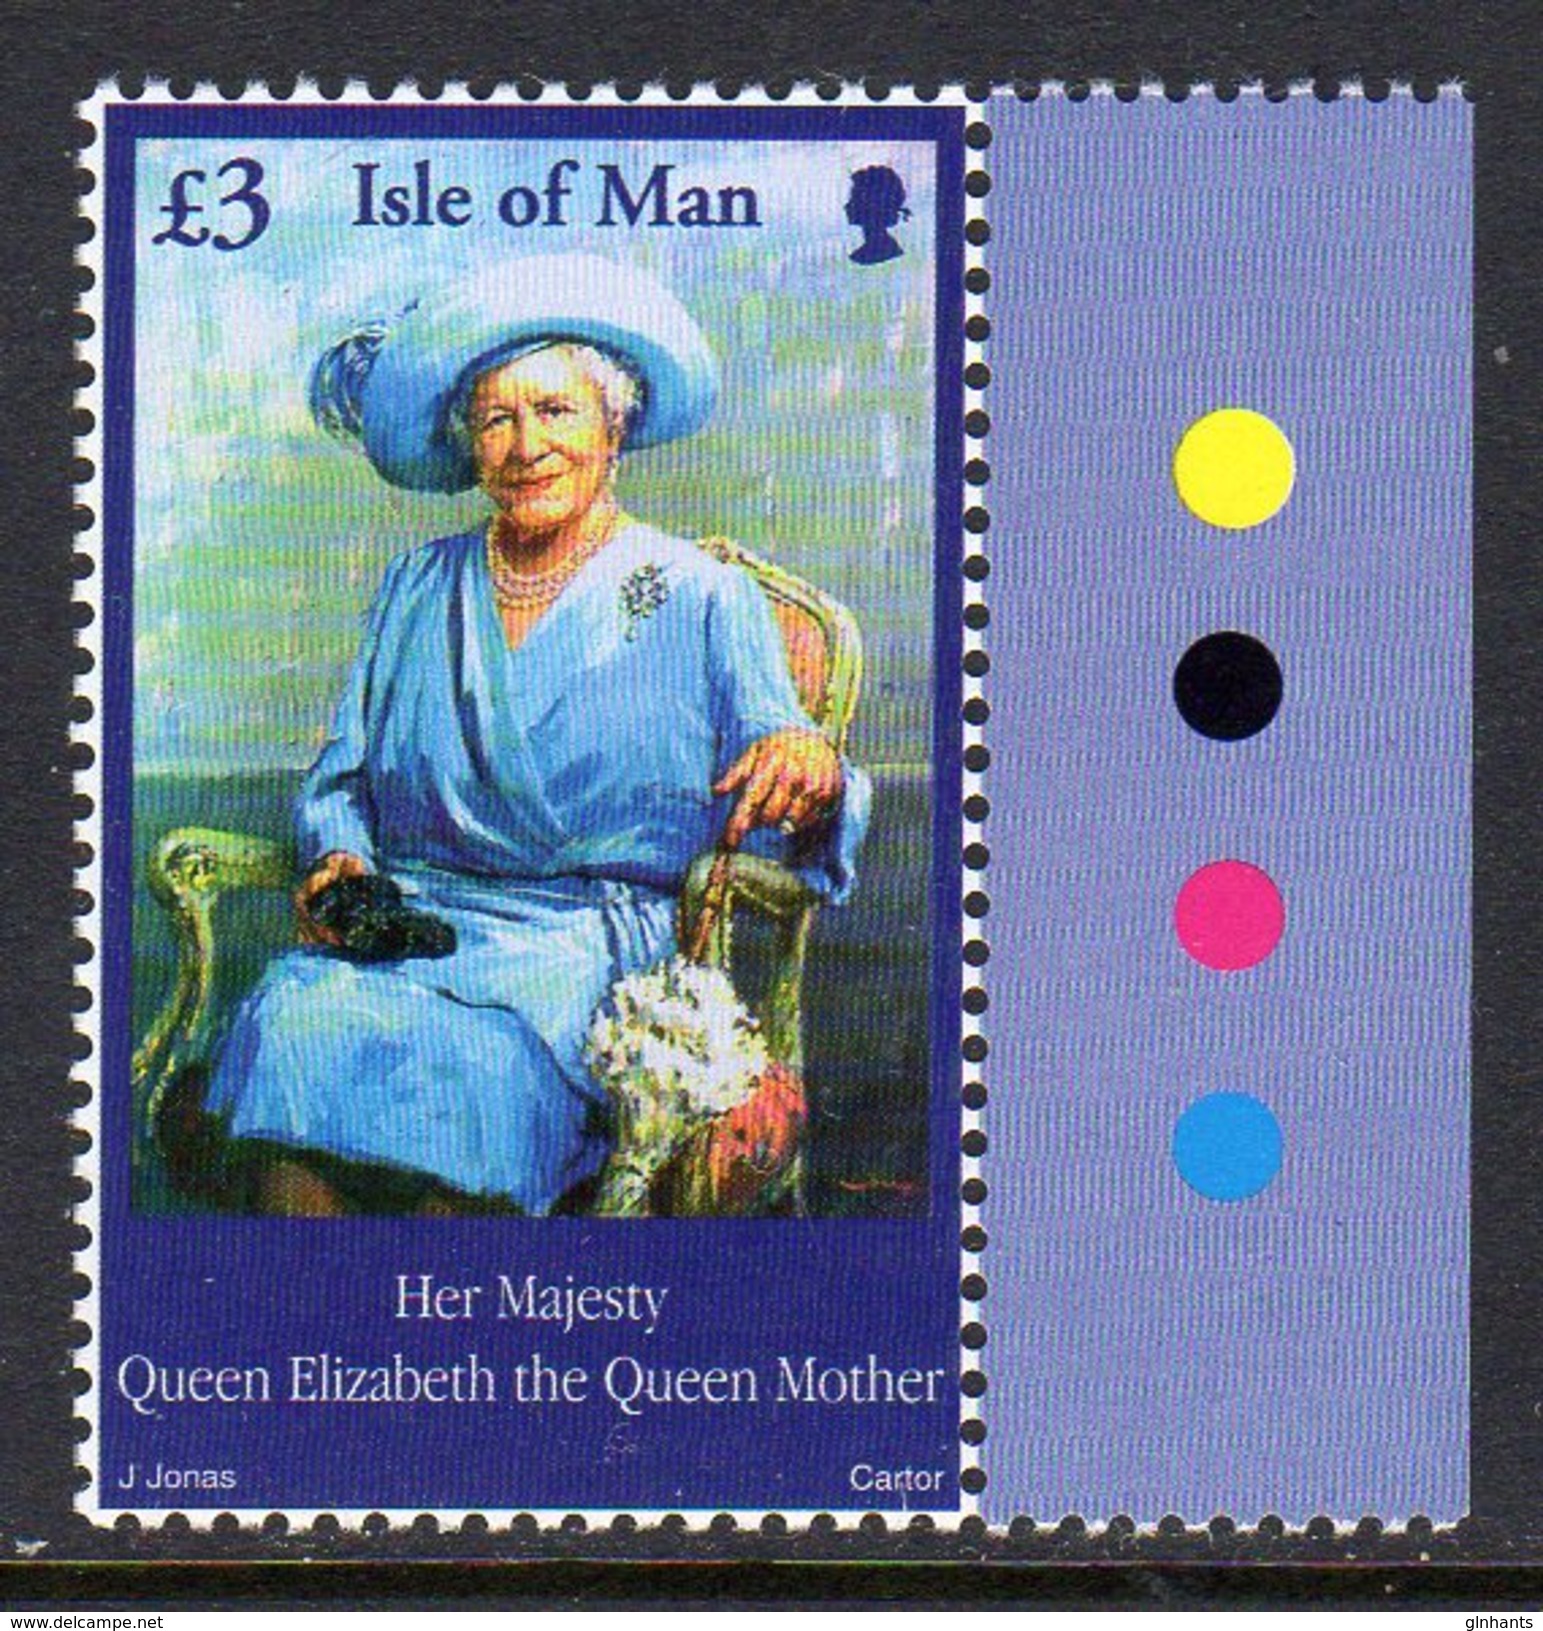 GB ISLE OF MAN IOM - 2002 QUEEN MOTHER COMMEMORATION SG 982 FINE MNH ** - Isle Of Man